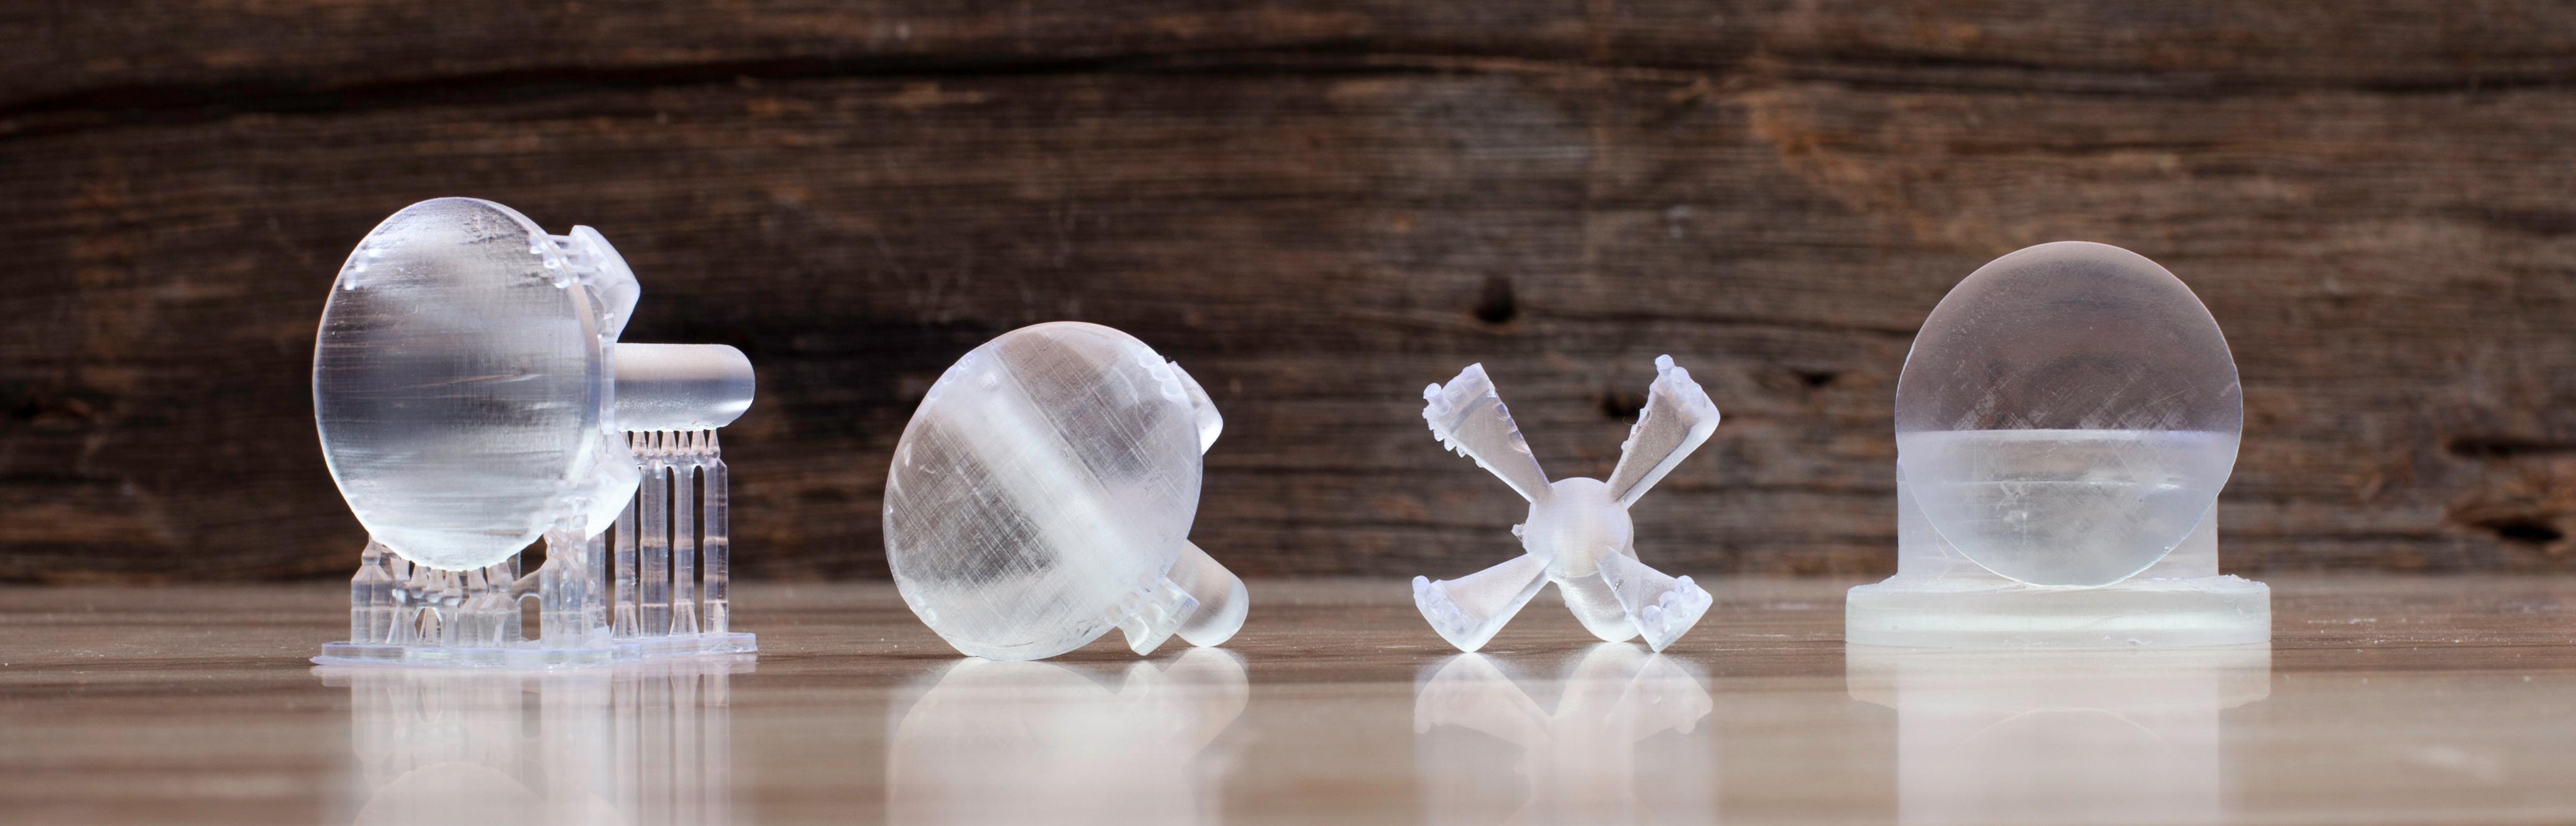 Formlabs 3D Prints Crystal Clear Magifying Lens on Form 1+ Printer